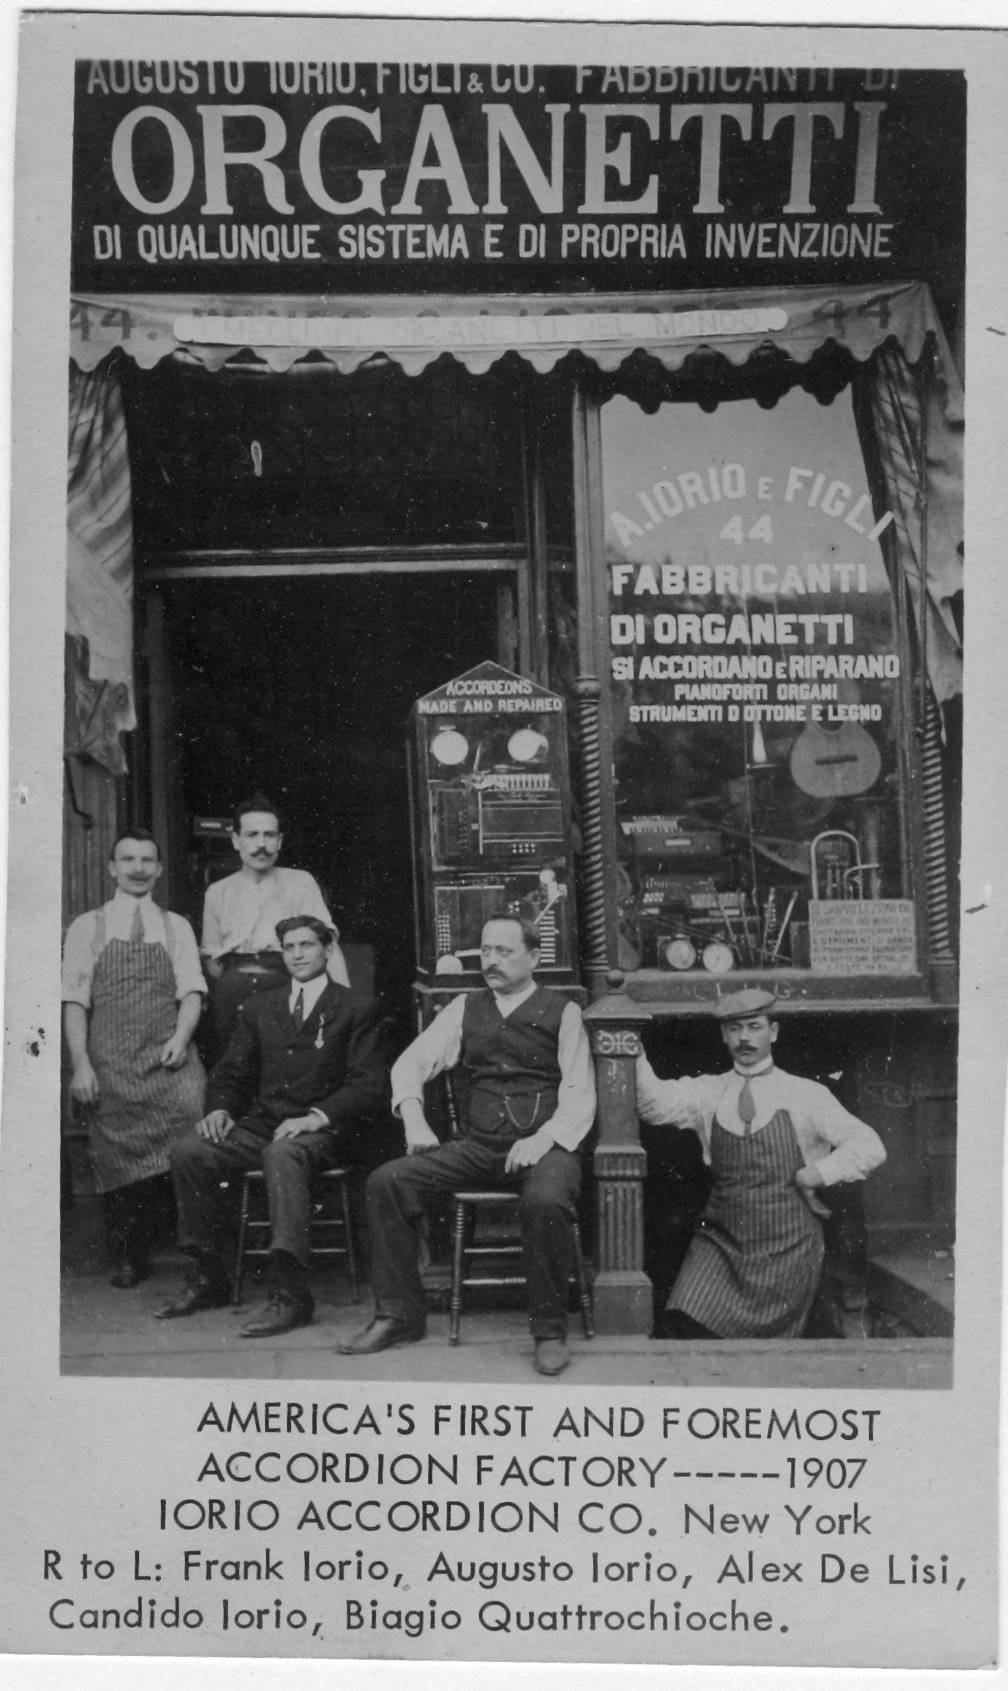 My Great Grandfather's  (Augusto Iorio) Accordion Shop in NYC